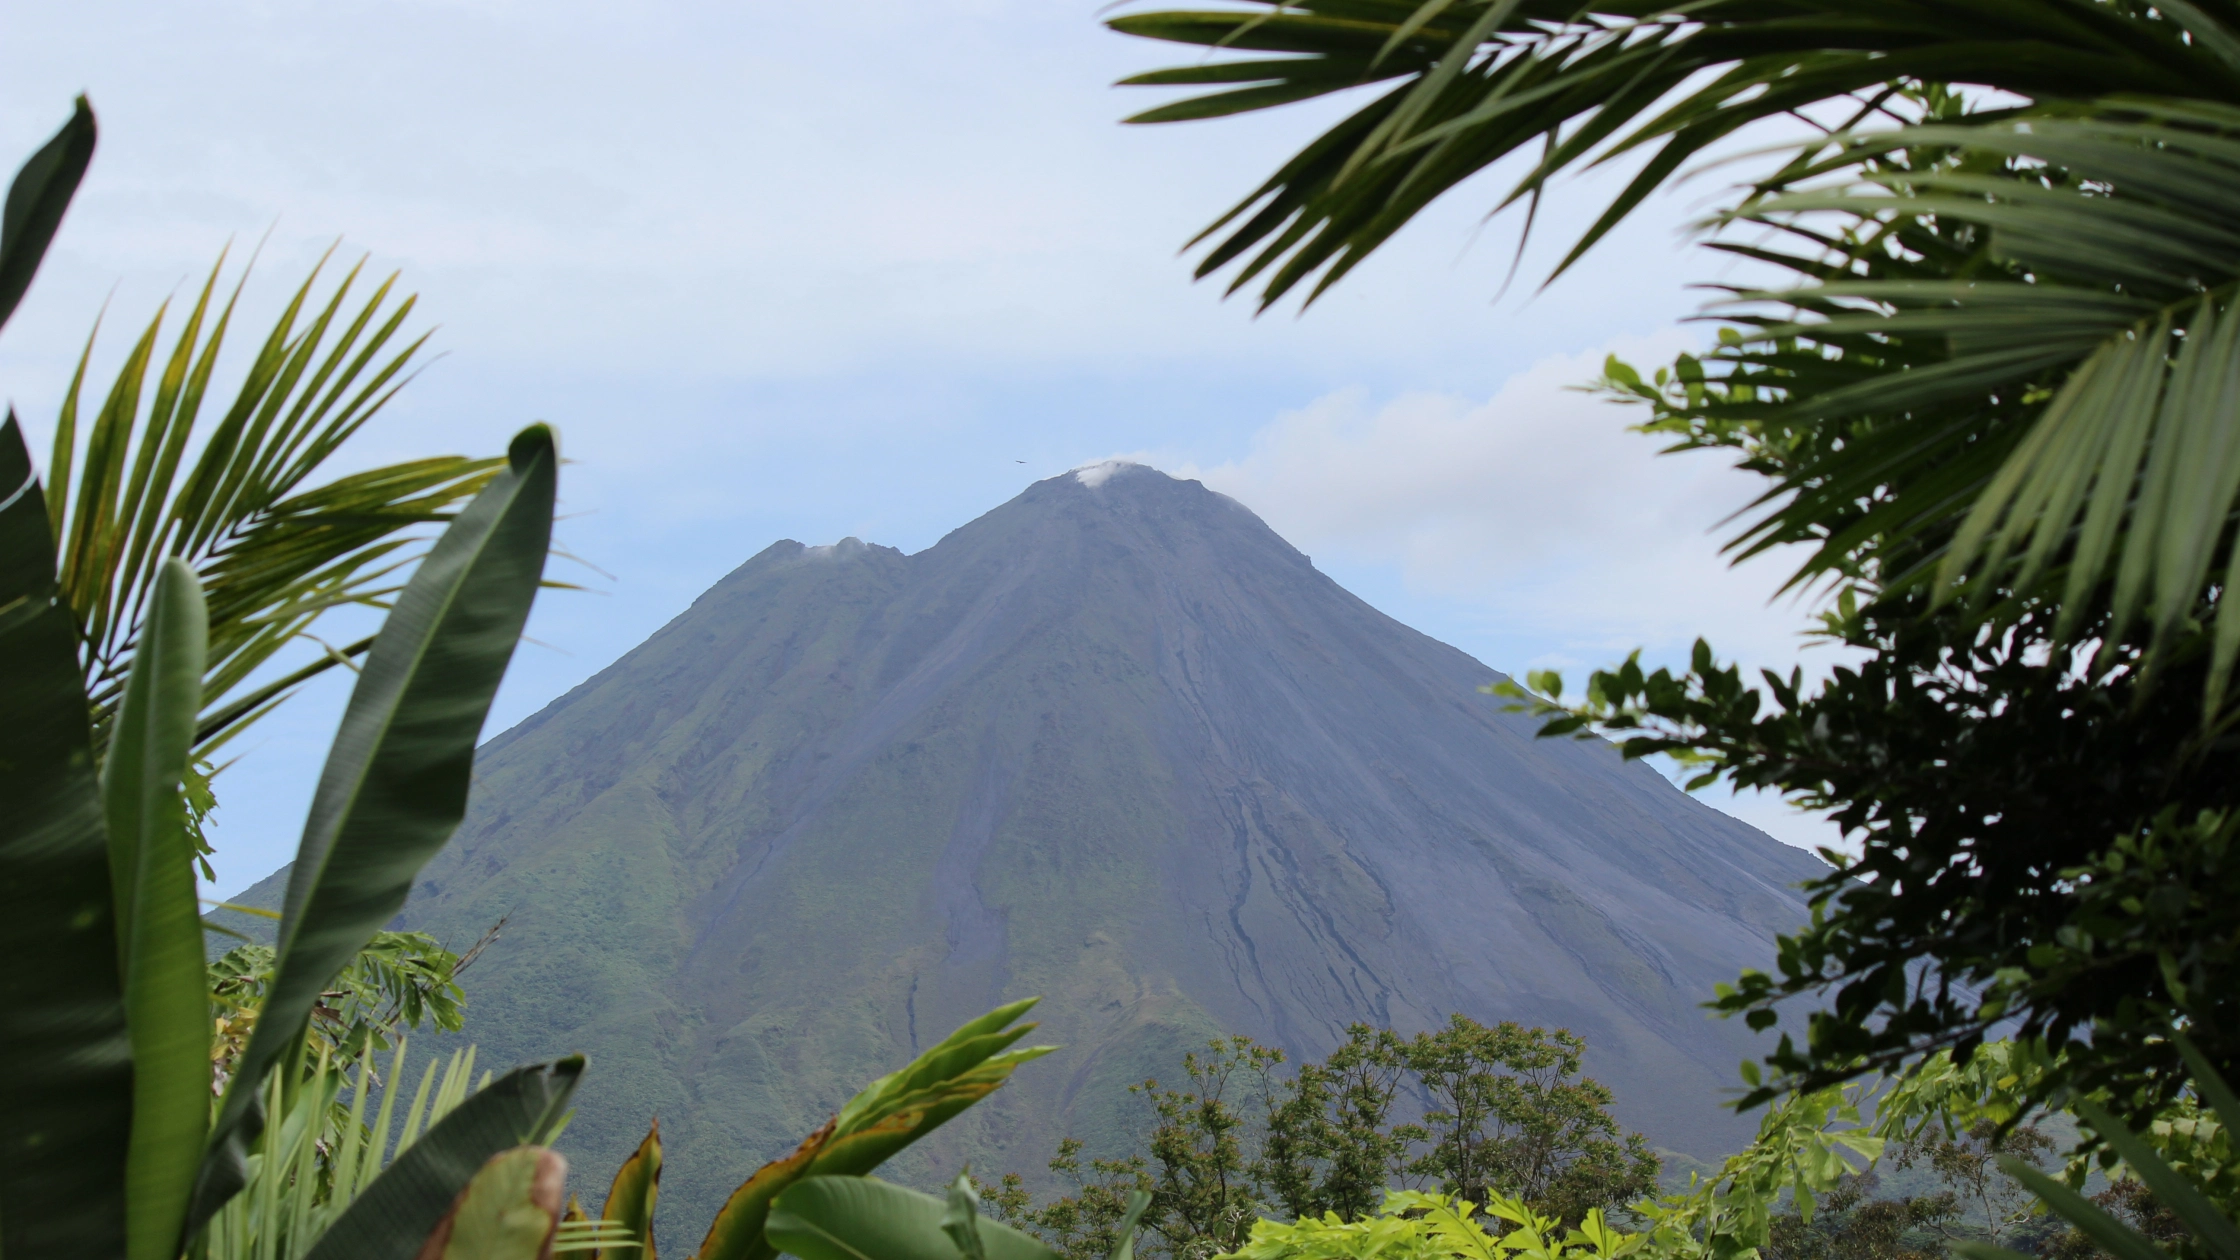 8 BEST THINGS TO DO IN LA FORTUNA, COSTA RICA